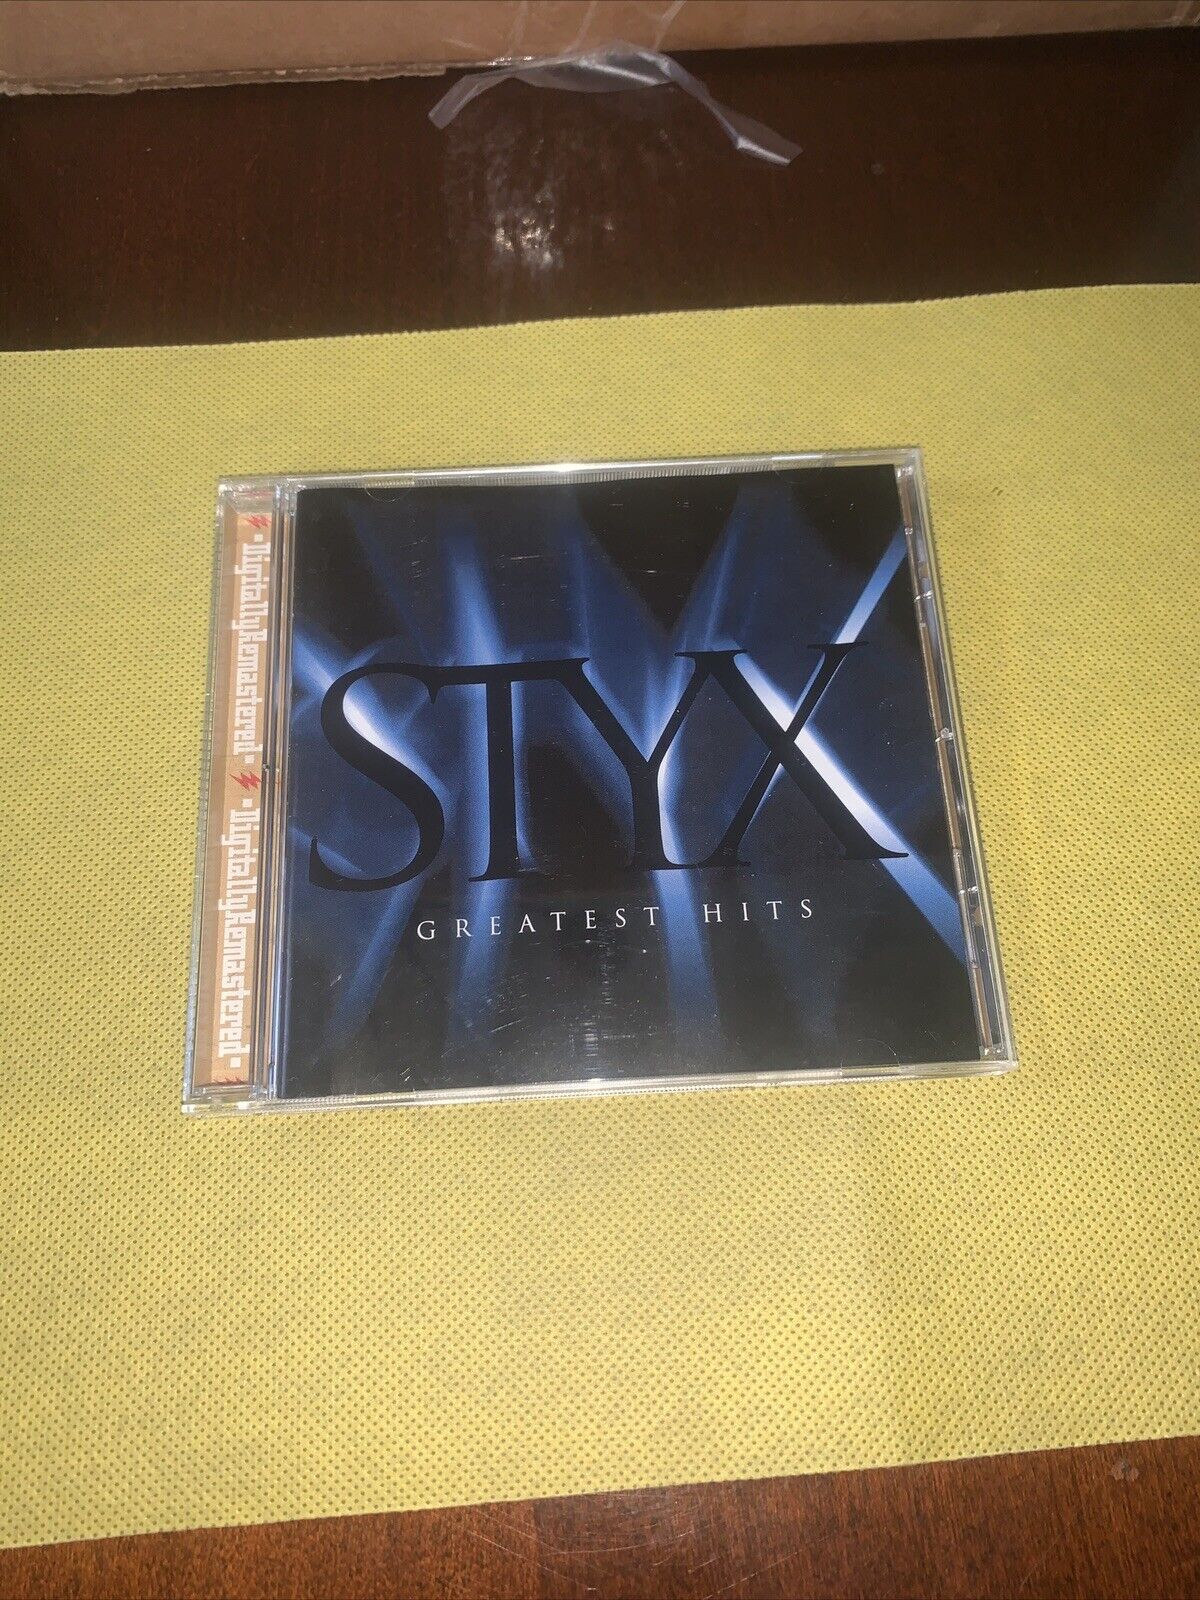 STYX / Greatest Hits: Time Stands Still When It Sounds by Styx (CD, 1995)